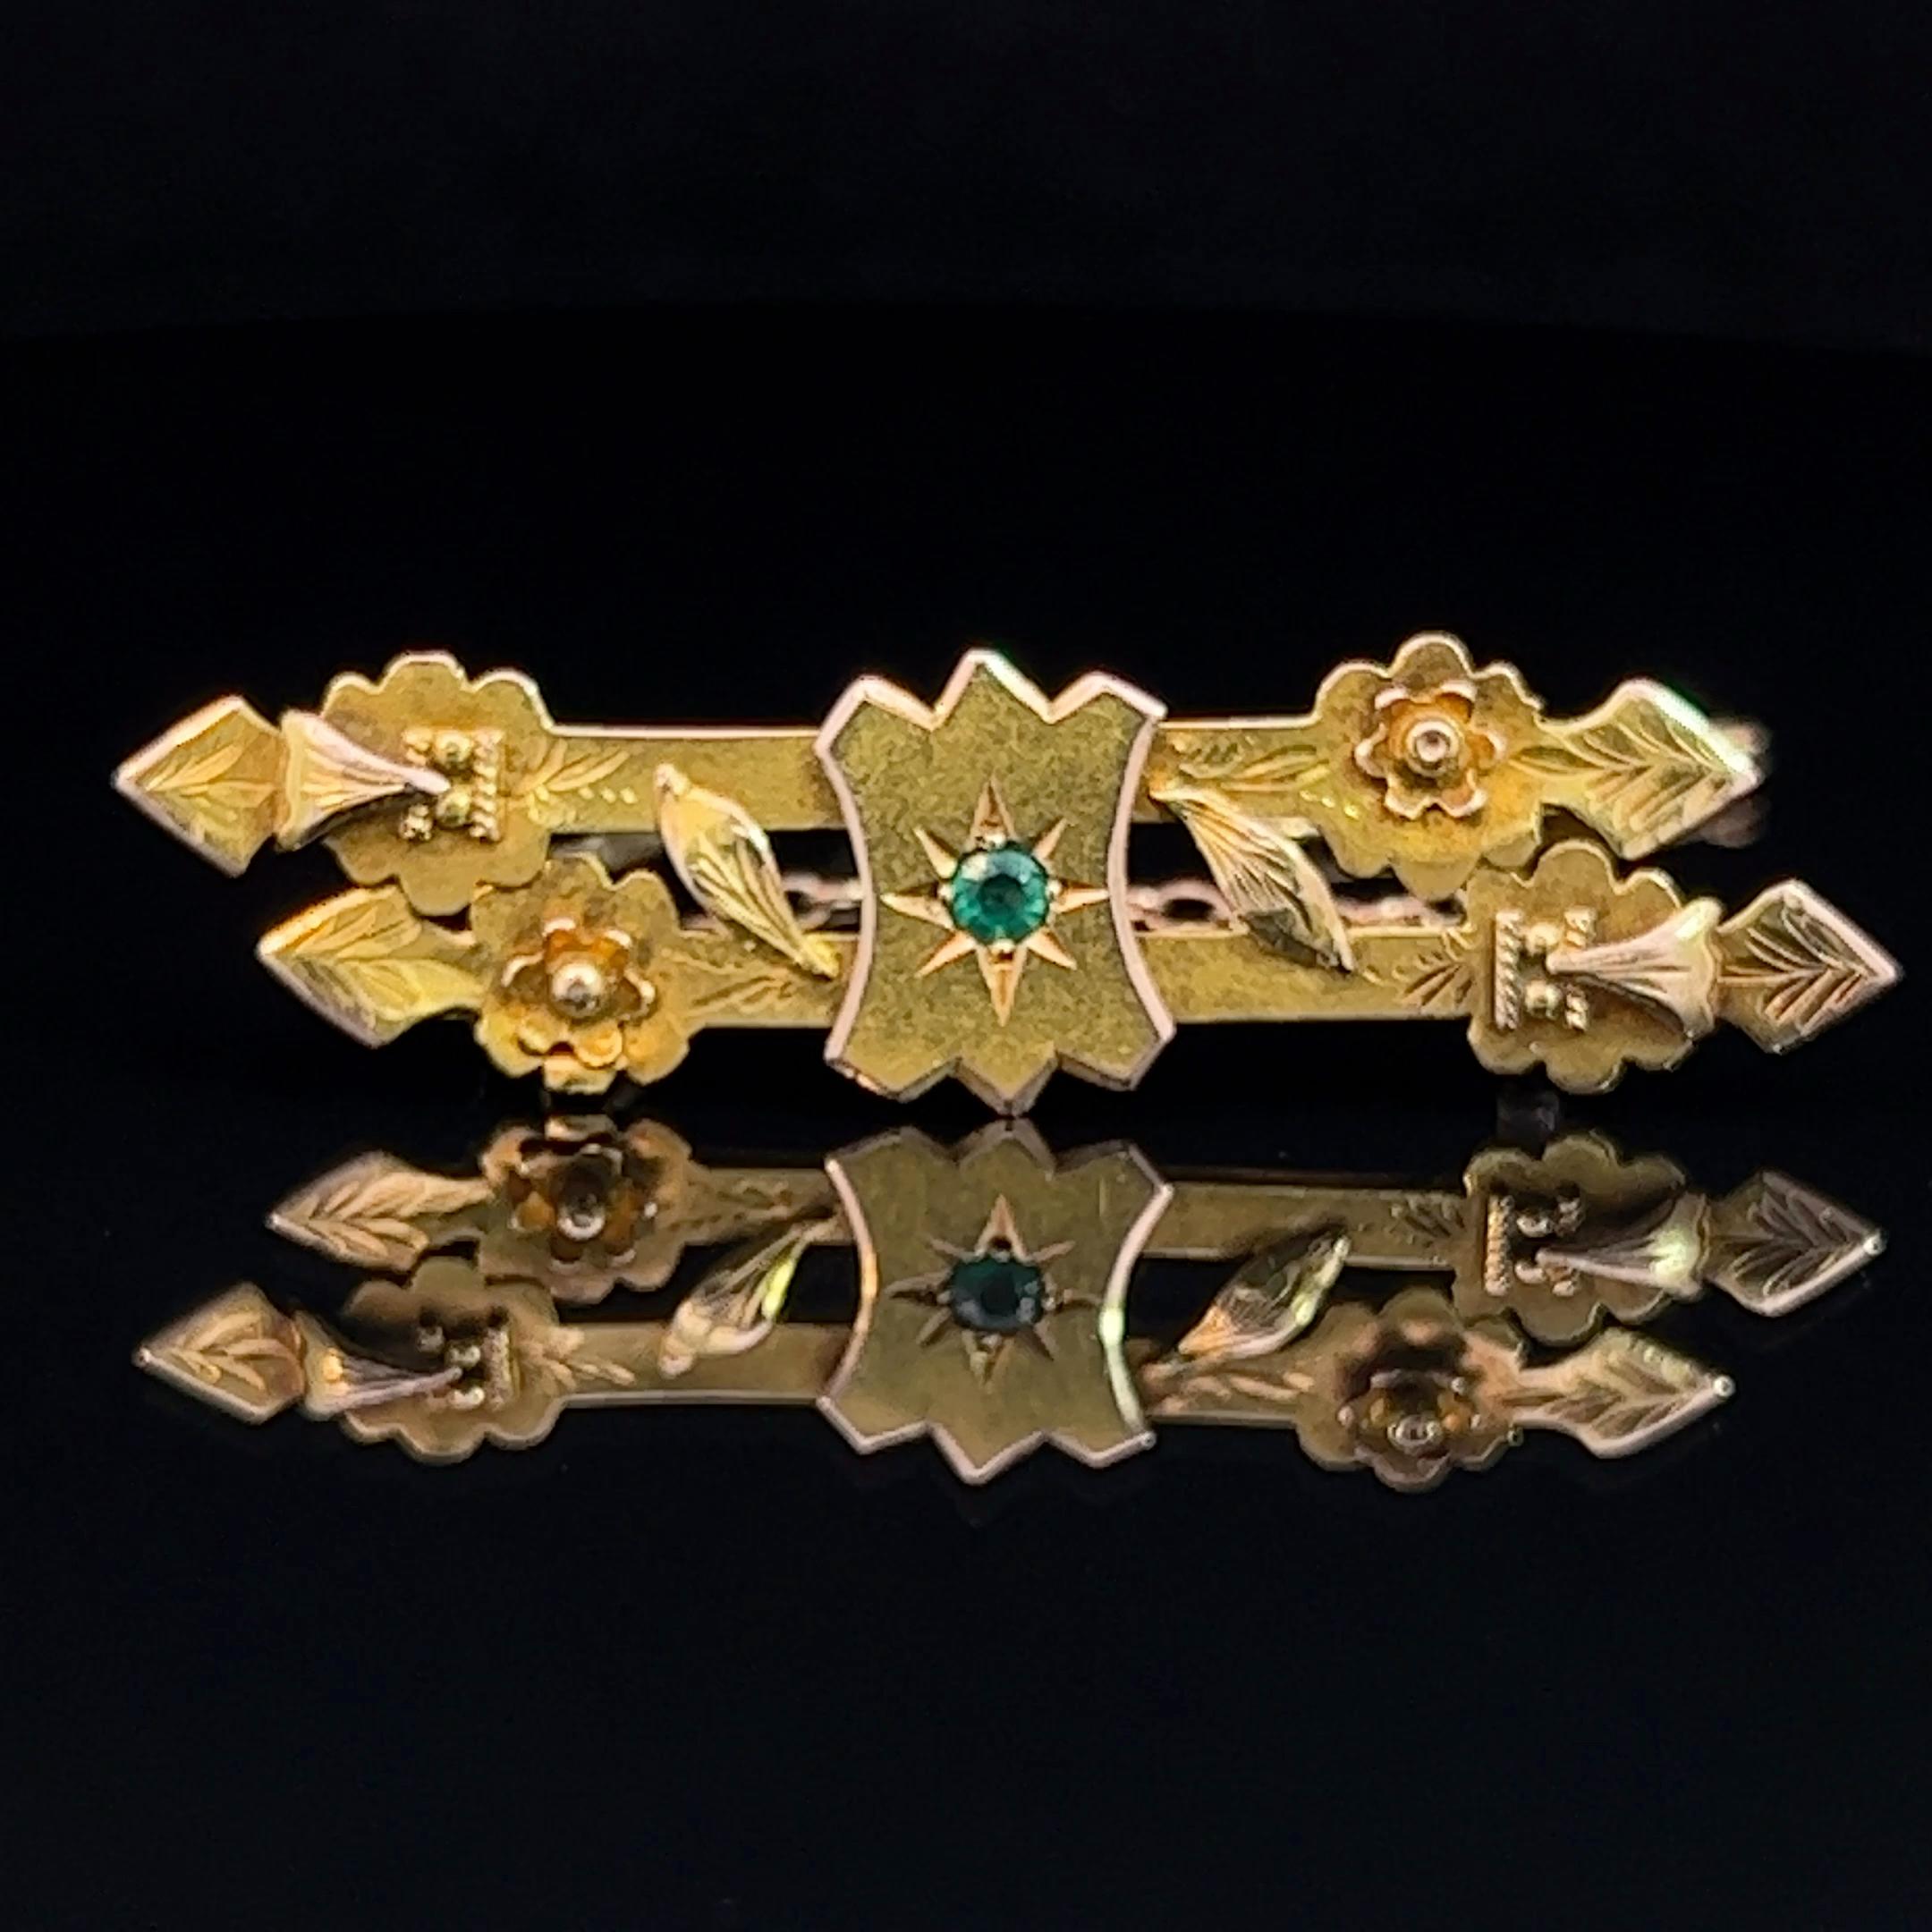 Australian made yellow gold double row, hollow, antique bar brooch. Featuring hand engraving with leaf,  floral, and shield overlay. The shield is set with a small bright green round doublet, possibly a garnet. This brooch has a metal pin and yellow